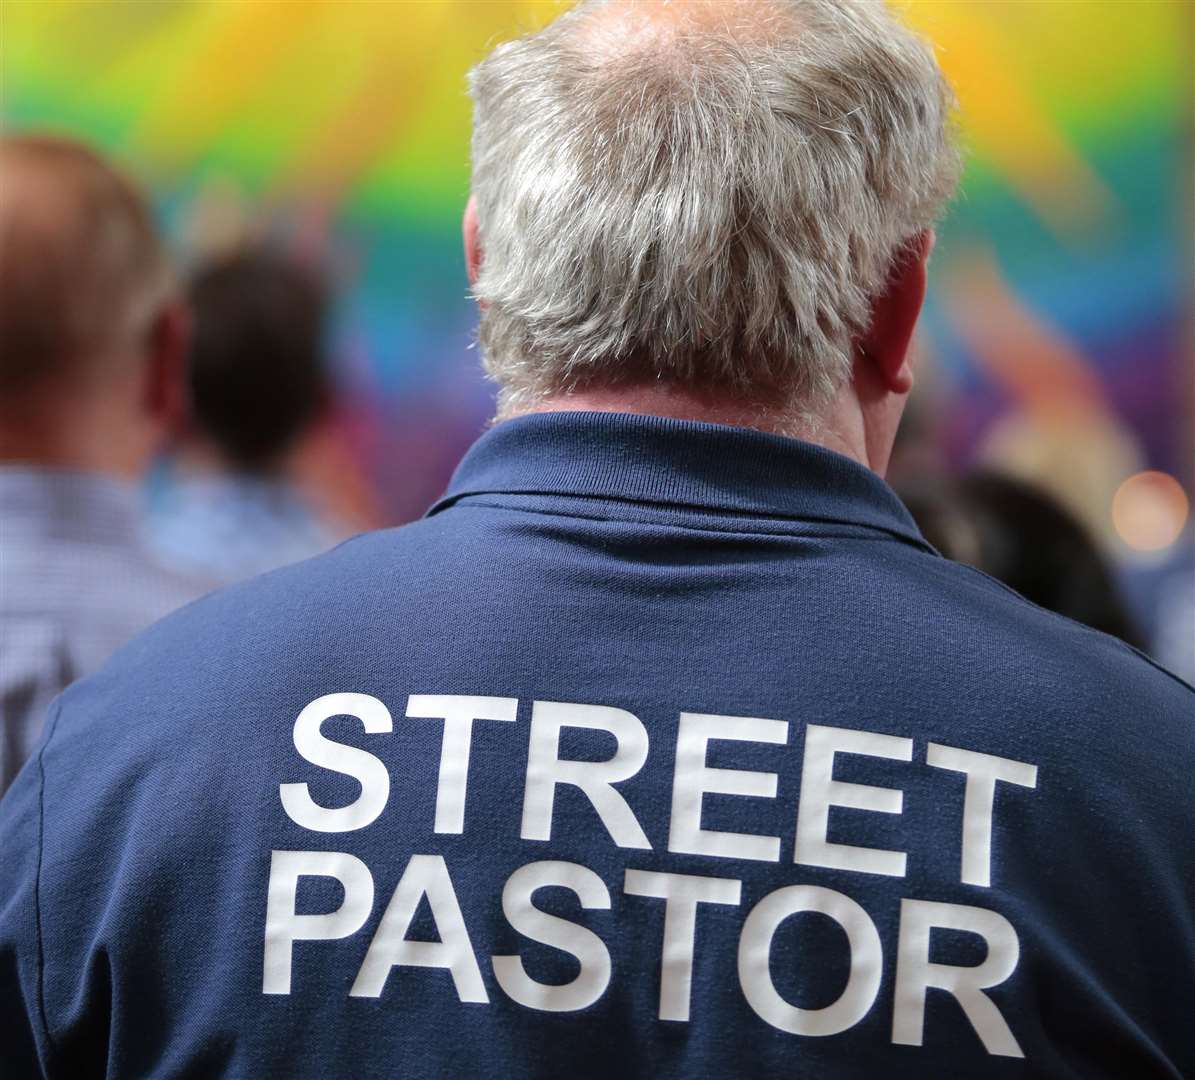 Maidstone’s street pastors, pictured right, have been asked to help with Little Mix fans’ welfare